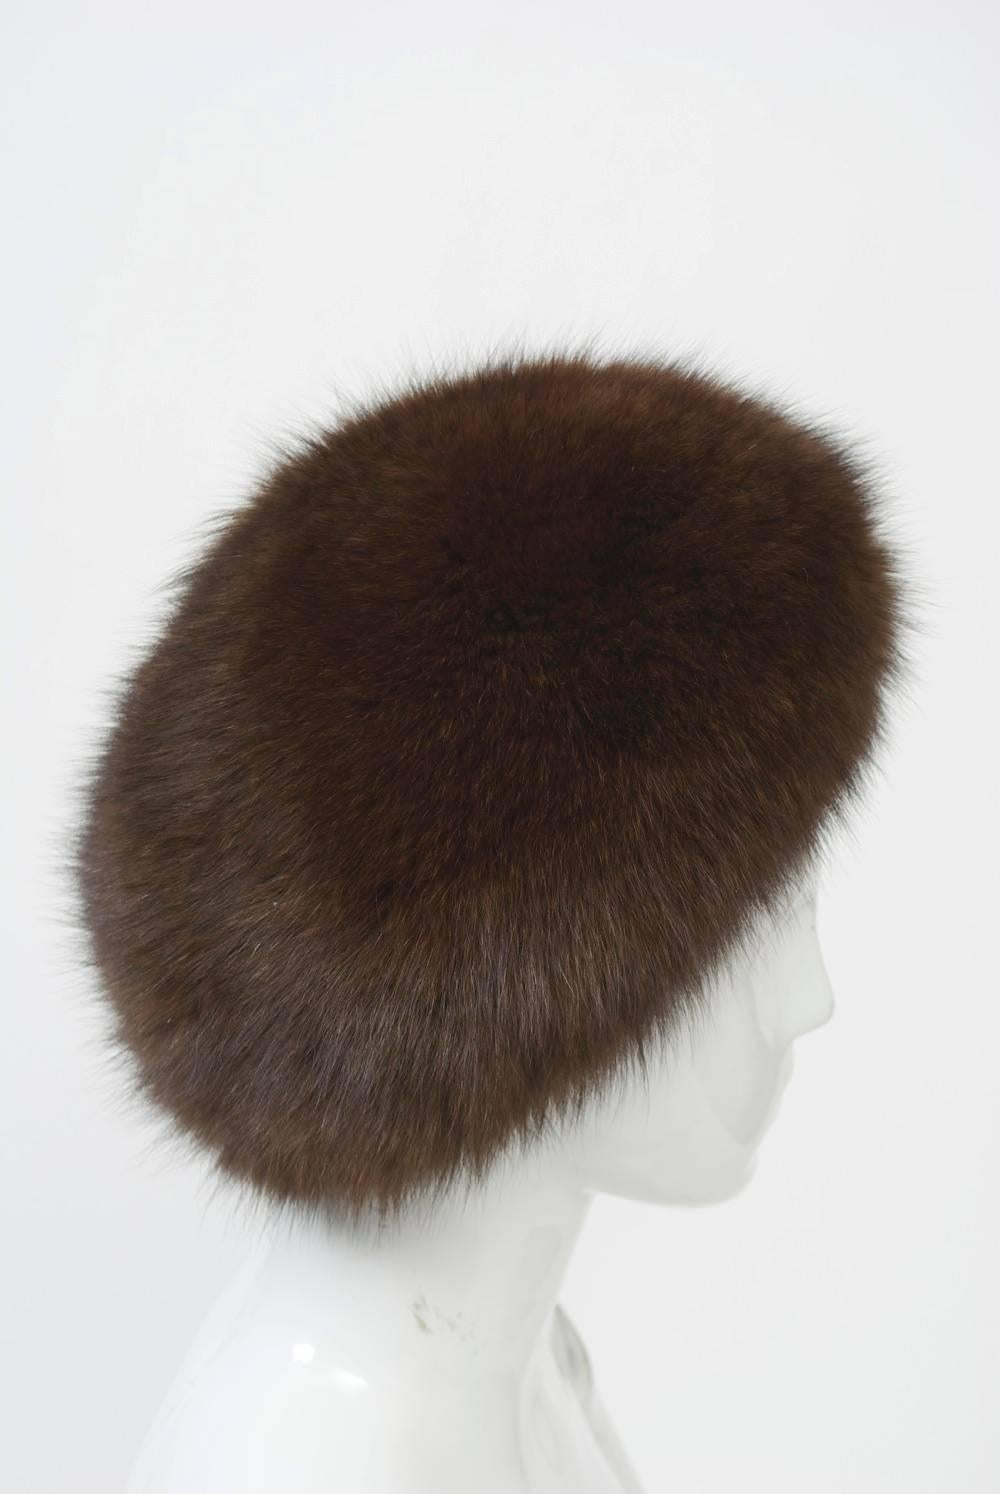 Beret-style hat in dark brown fox with black satin lining. Looks unused - fur lush and fluffy.